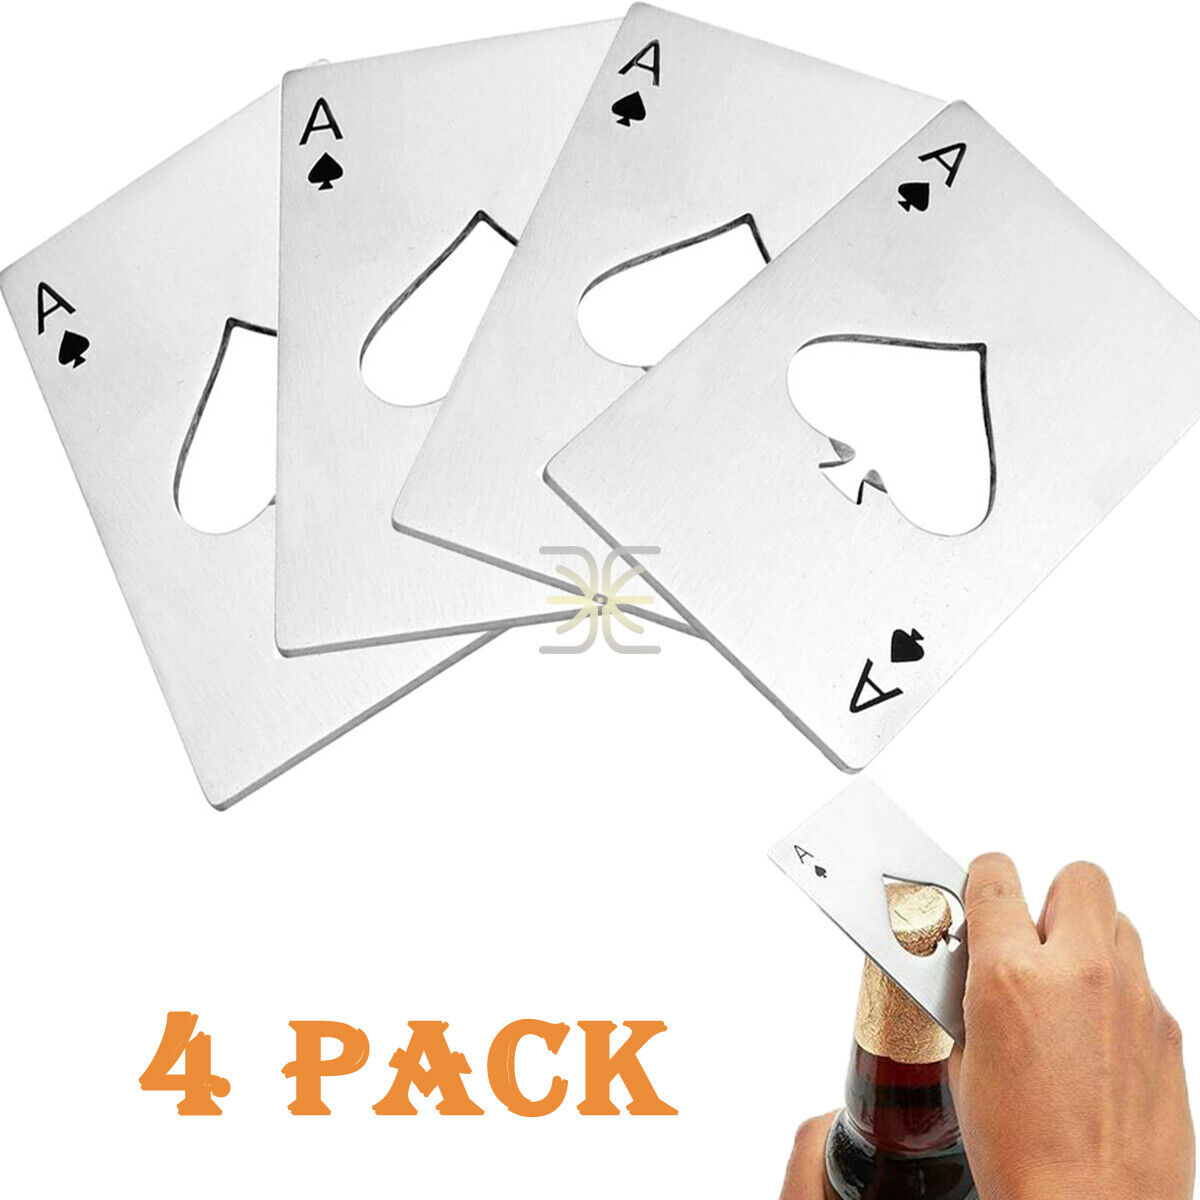 4 Pack Stainless Steel Beer Bottle Opener Credit Card Size Ace Poker Card Silver